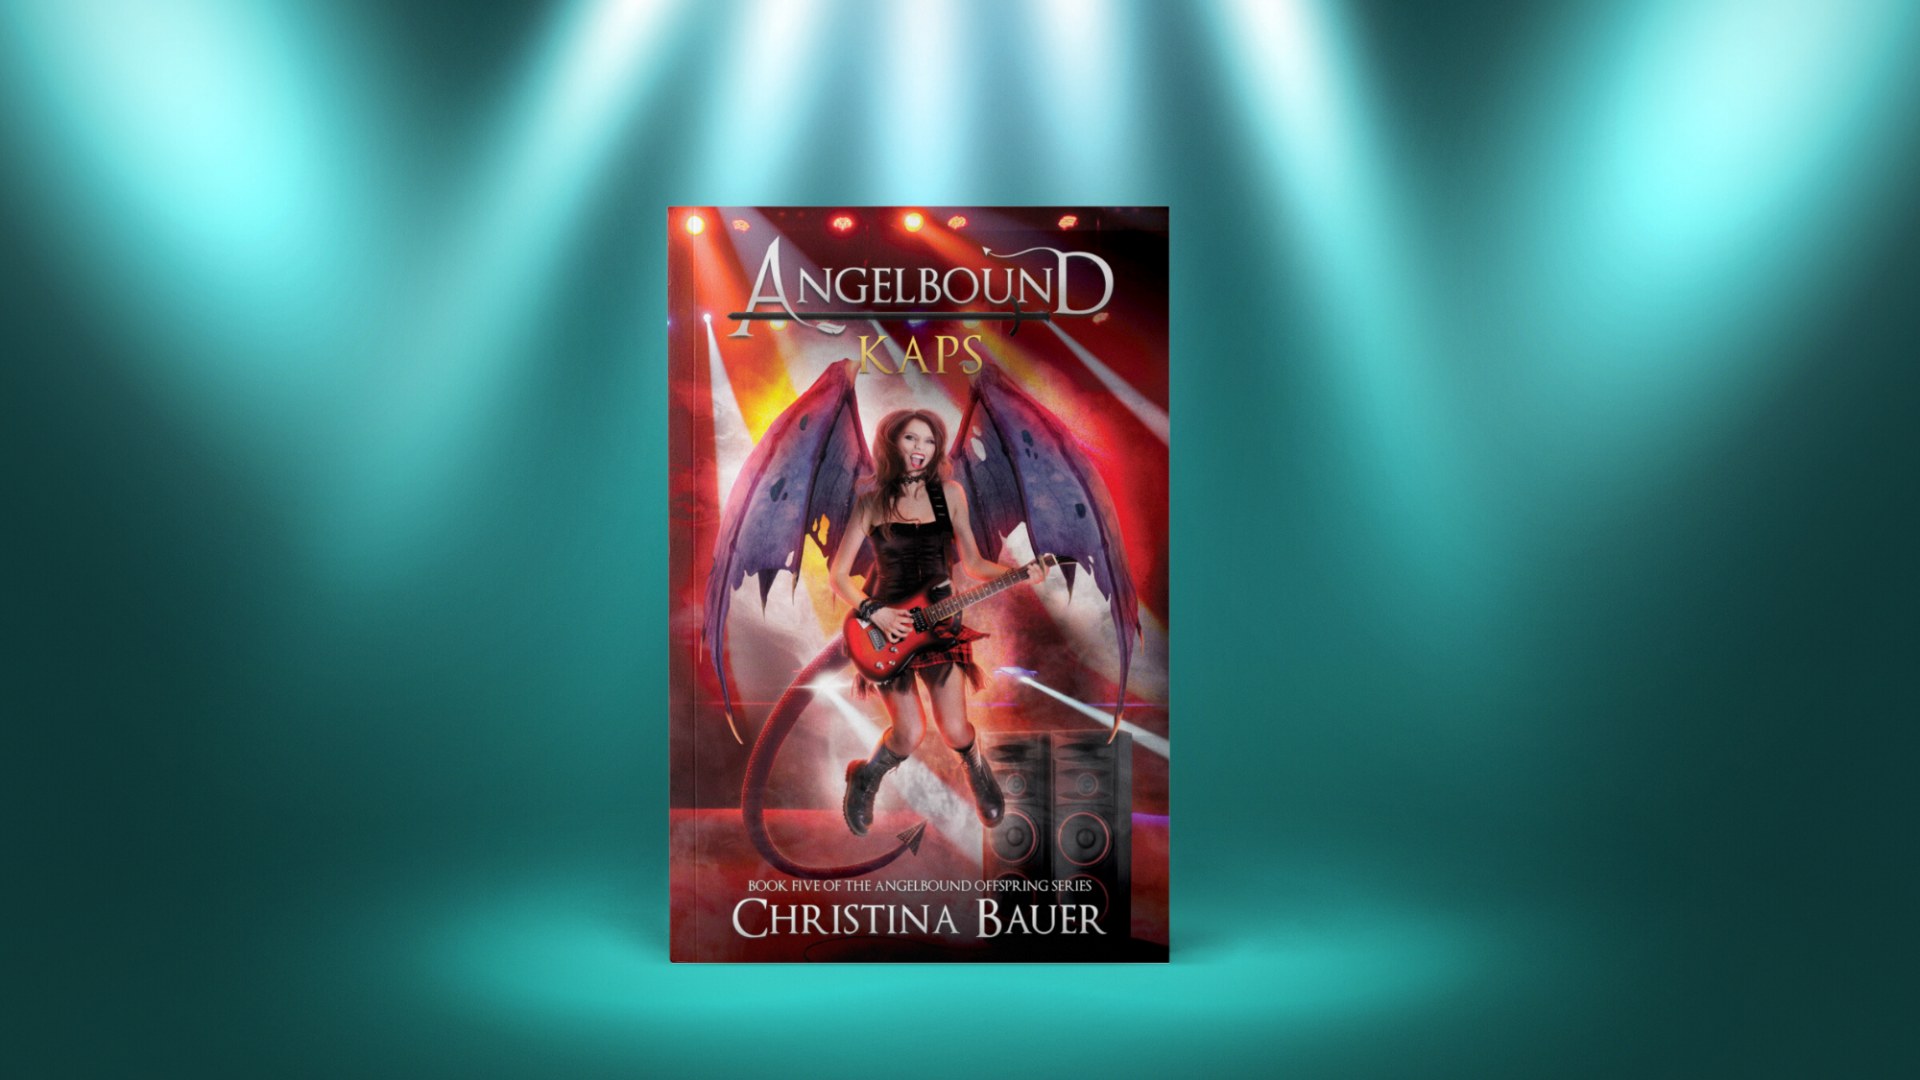 Chapter One Live - KAPS (Angelbound Offspring #5)